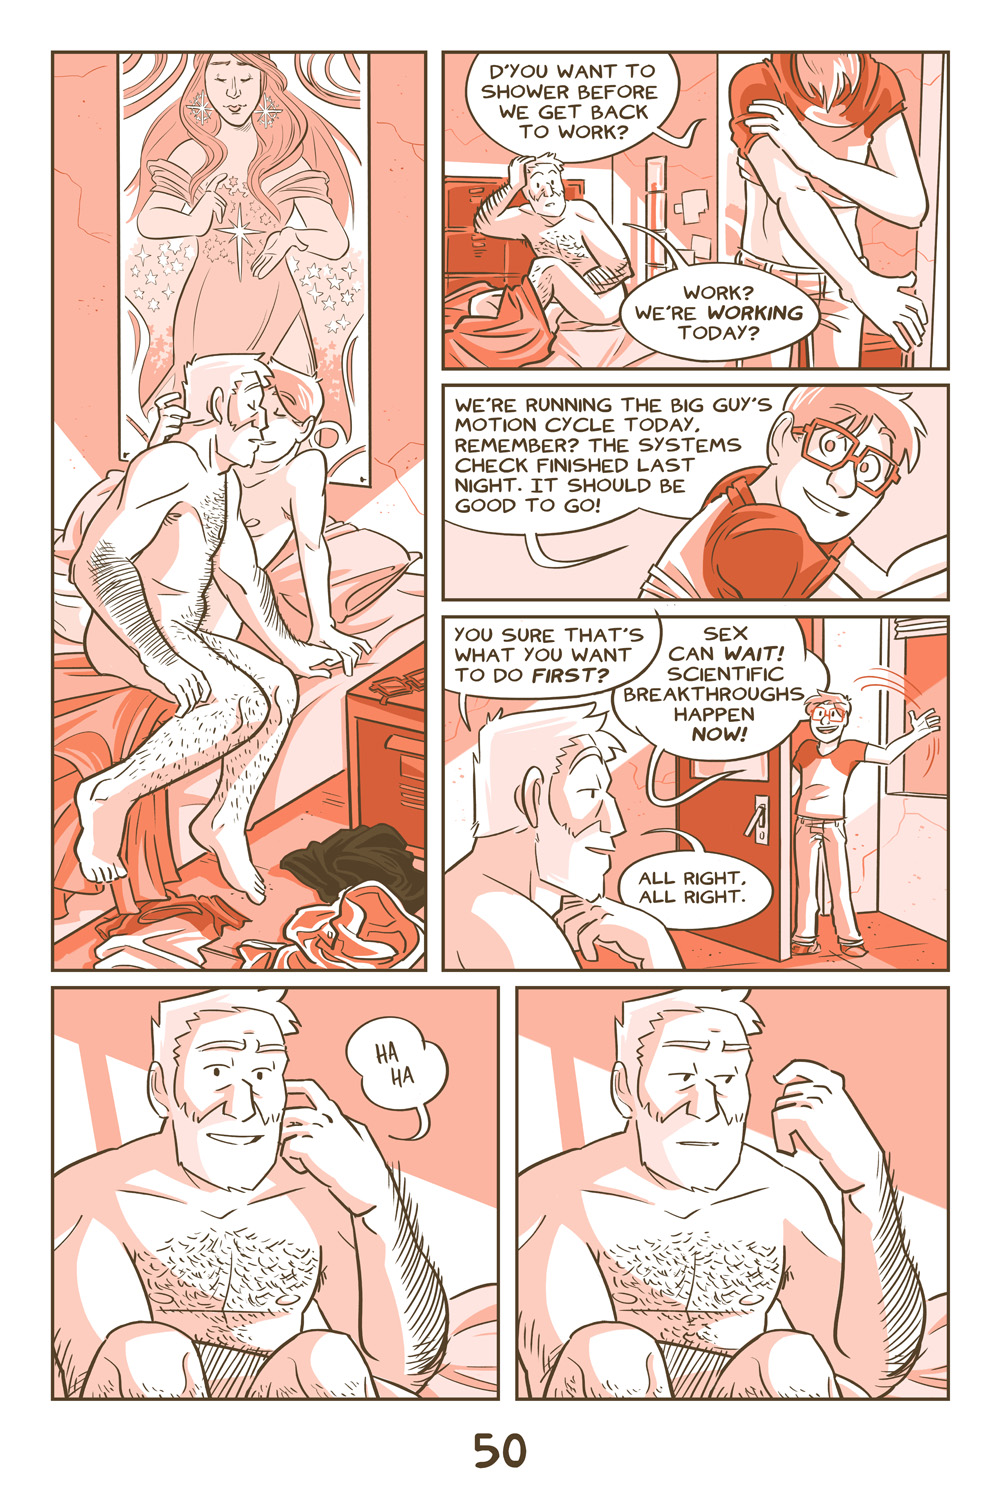 Chapter 2, Page 50 (NSFW)